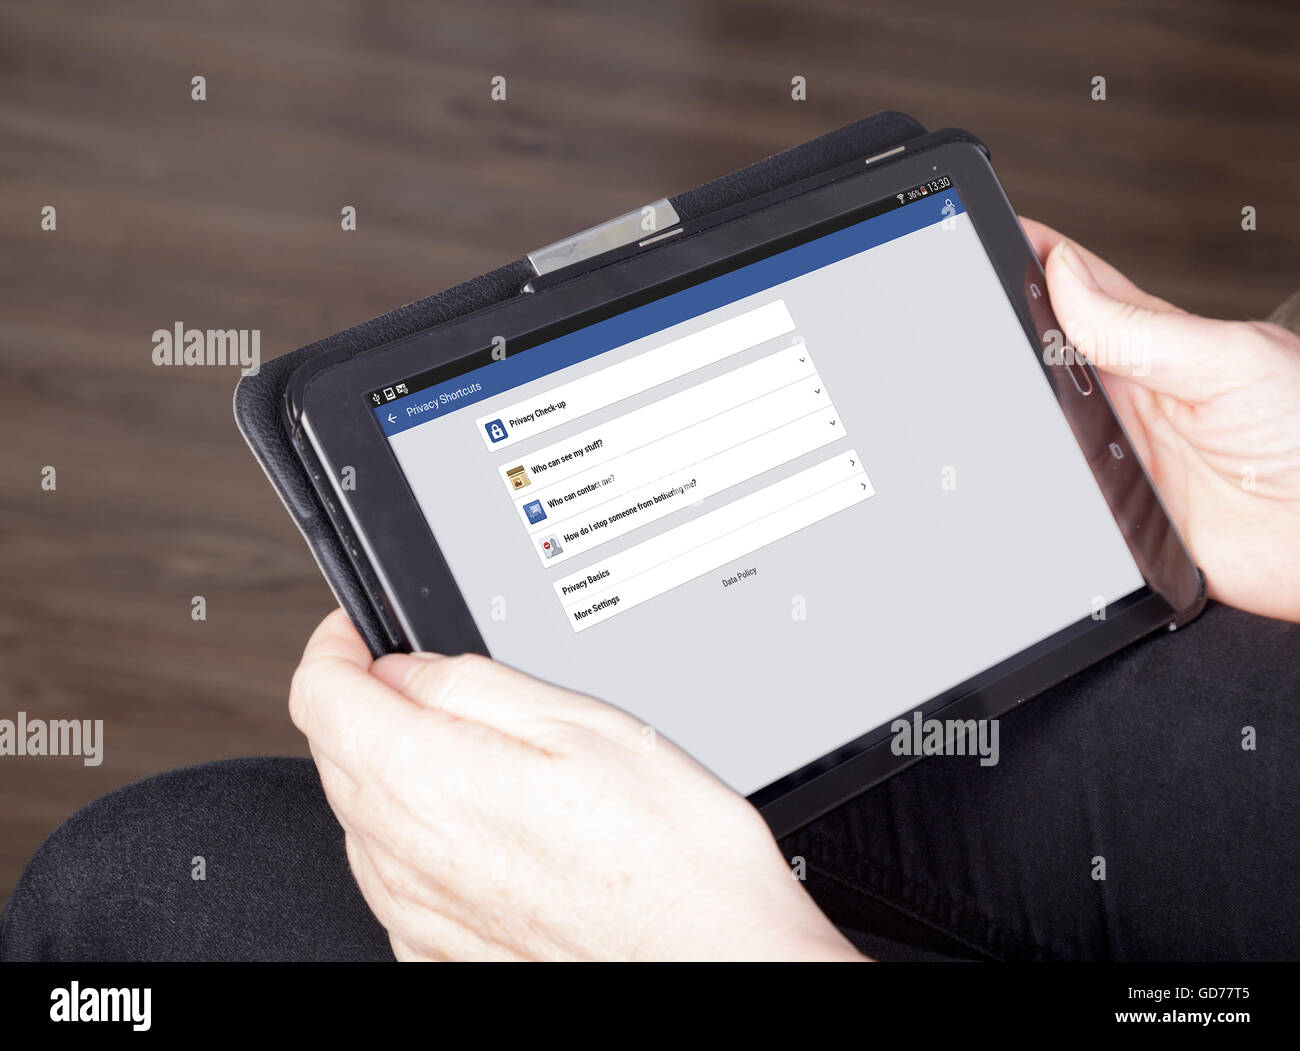 viewing Facebook privacy shortcuts on a tablet Stock Photo